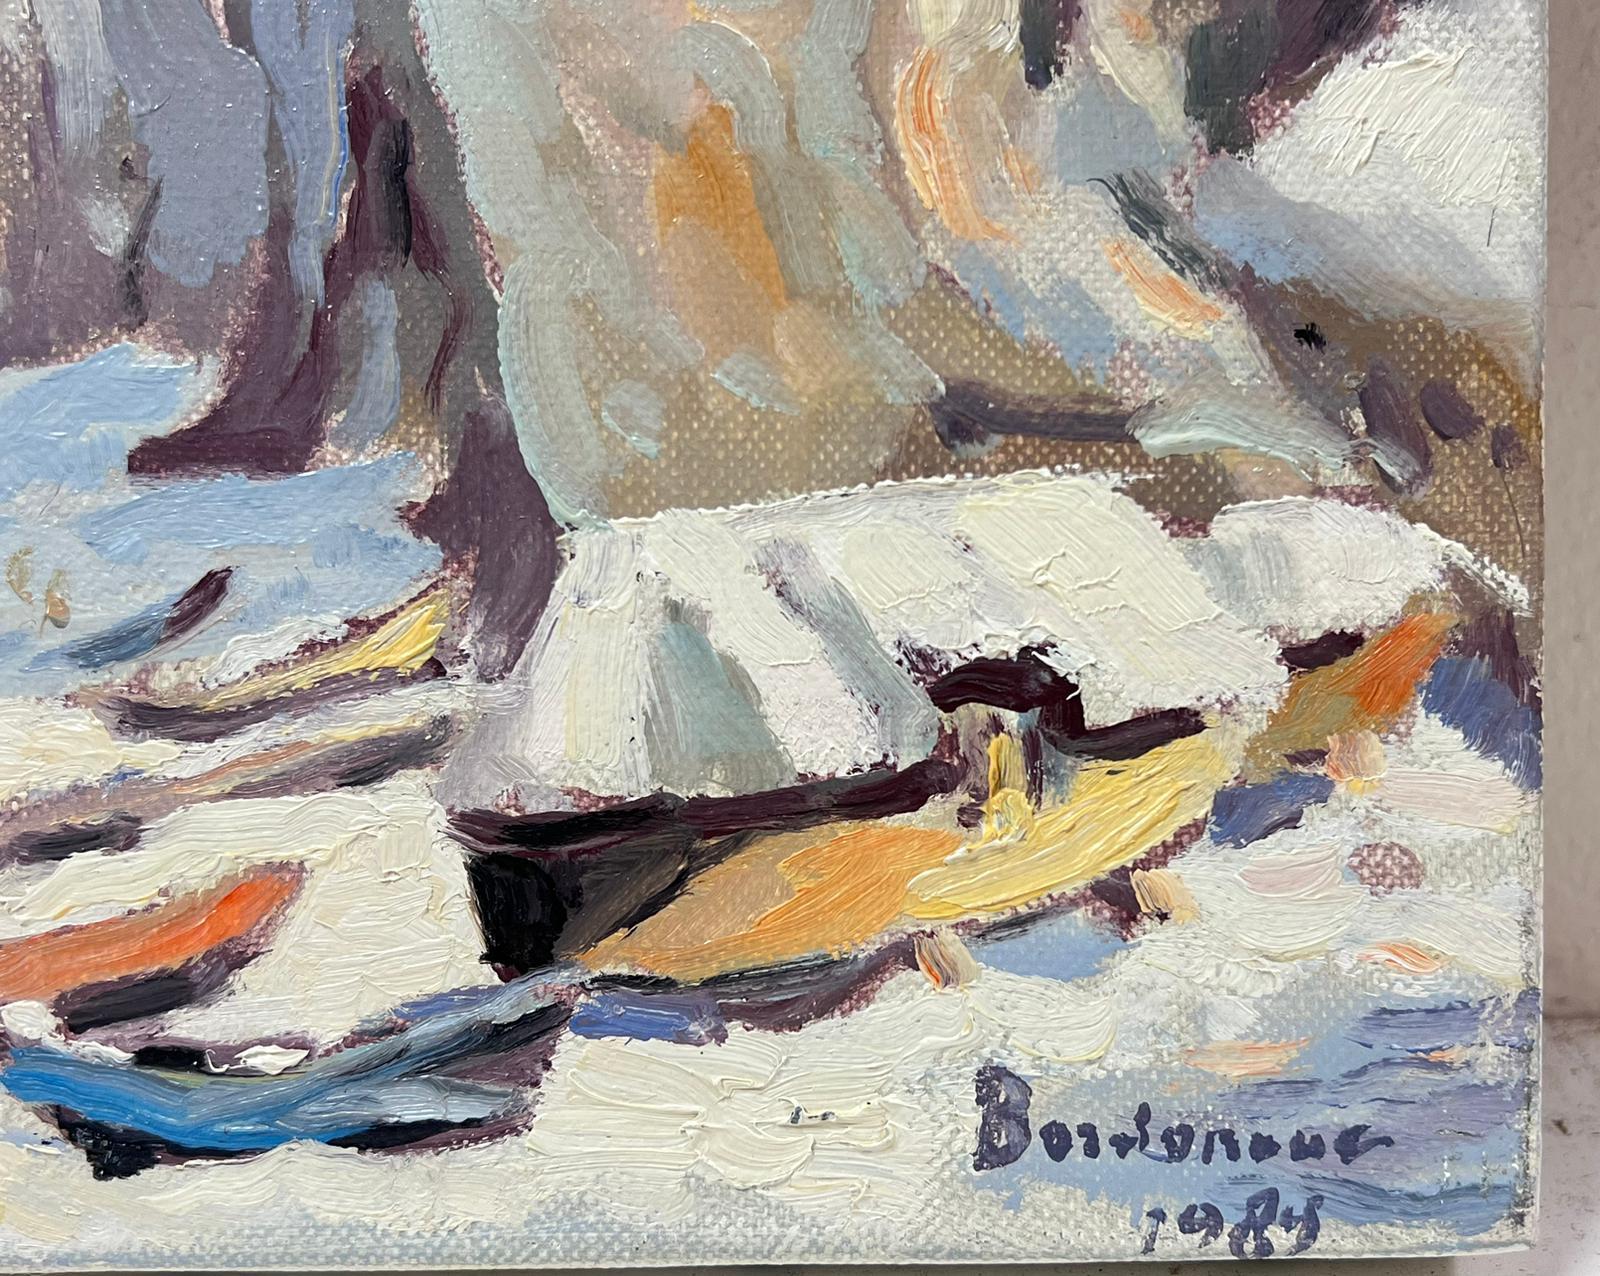 Winter
by Georges Bordonave (French contemporary)
signed oil painting on canvas, unframed
dated 1989
canvas: 11 x 13.75 inches
condition: very good
provenance: from a large private collection of this artists work, western Paris, France. 